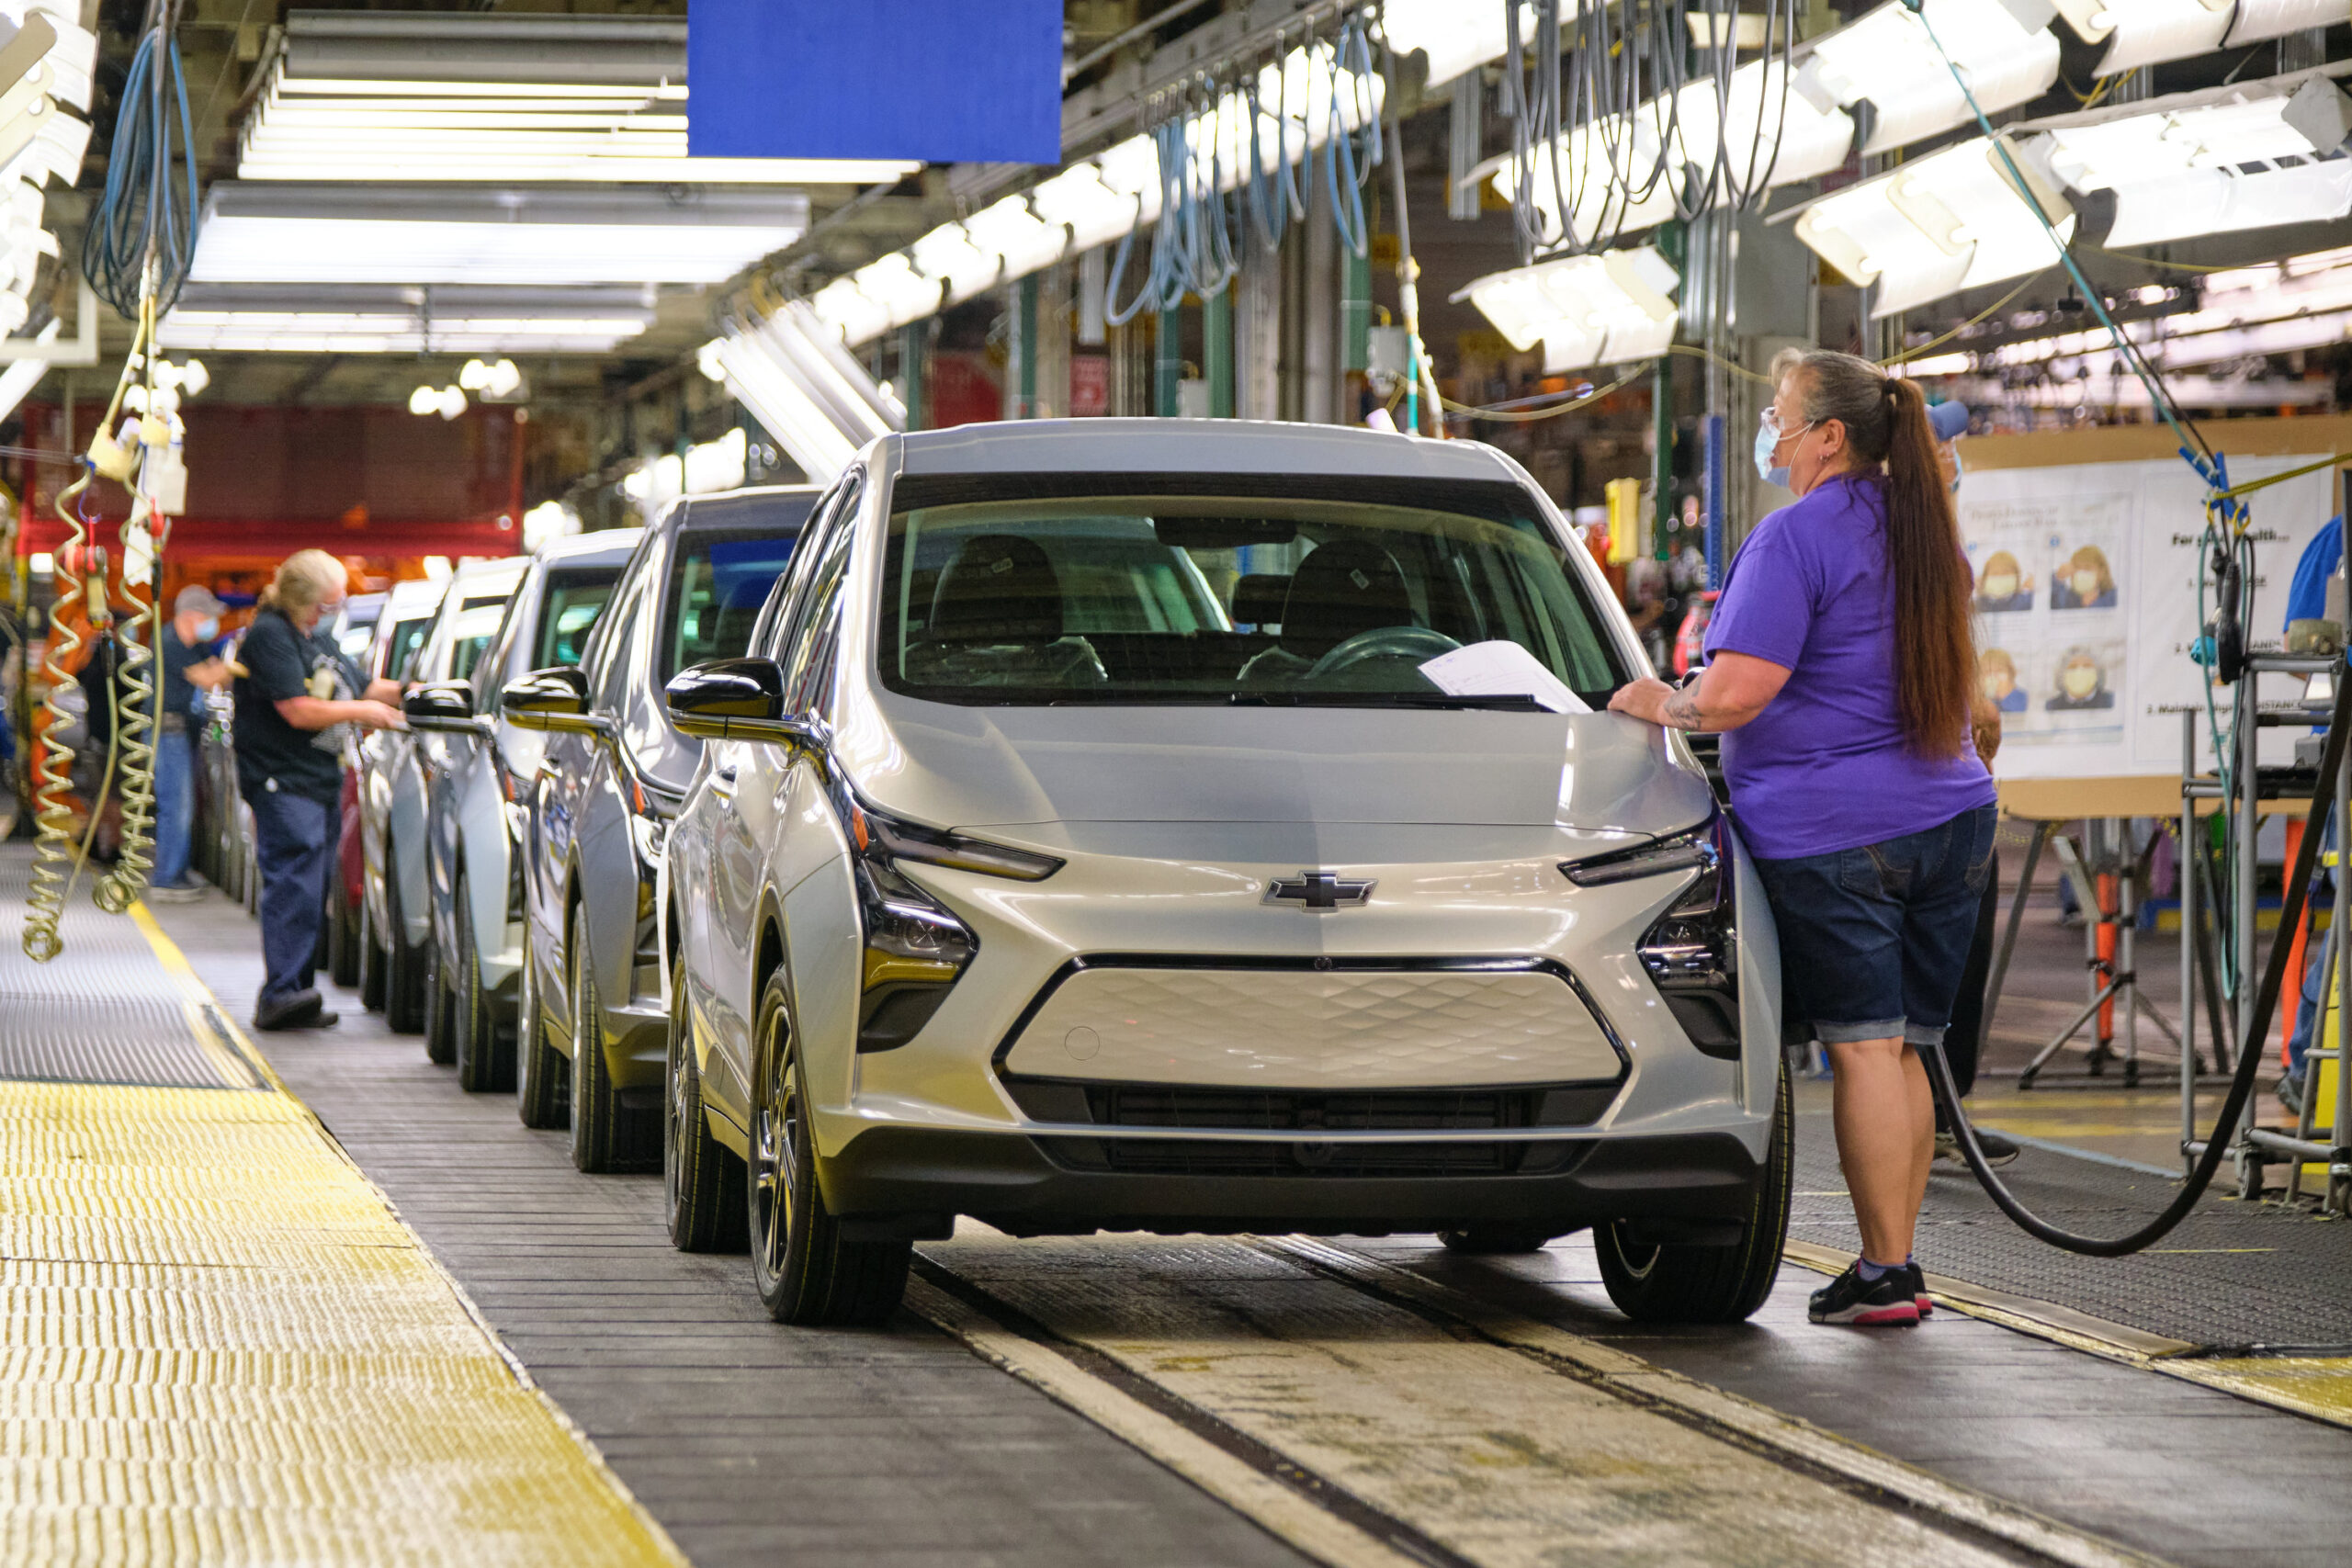 Report: GM plans more Michigan EV assembly, battery plantReport: GM plans more Michigan EV assembly, battery plant